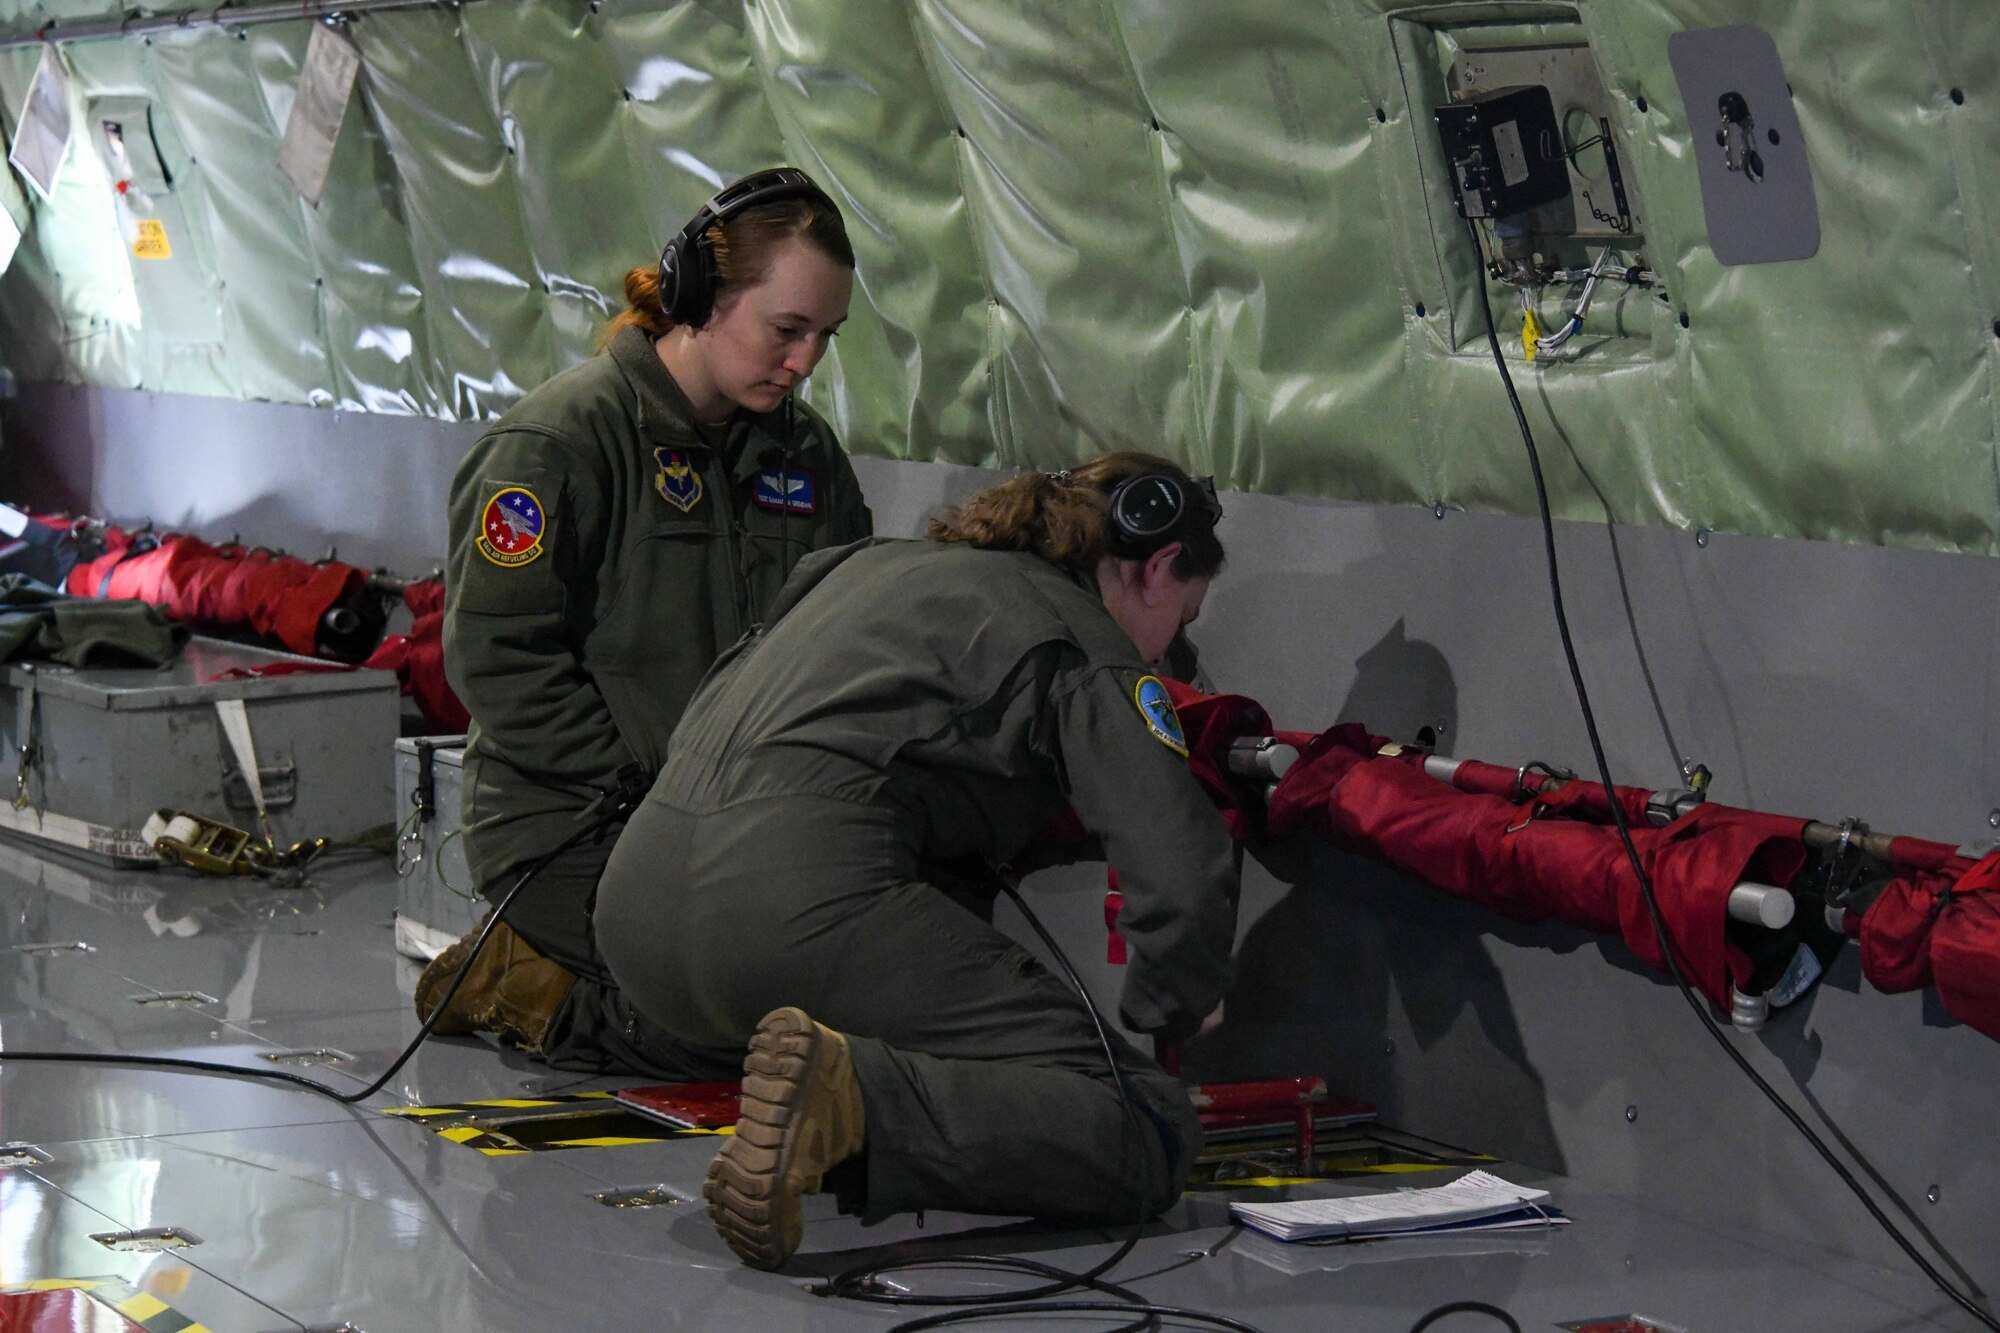 U.S. Air Force Tech. Sgt. Samantha Grendahl, 54th Air Refueling Squadron (ARS) instructor boom operator, and Airman 1st Class Maddie Veyon, 166th ARS boom operator in training, manually operate the hydraulics of a KC-135 Stratotanker at Altus Air Force Base, Oklahoma, March 28, 2023. Students practice operating hydraulics manually in case systems fail during operations. (U.S. Air Force photo by Airman 1st Class Miyah Gray)